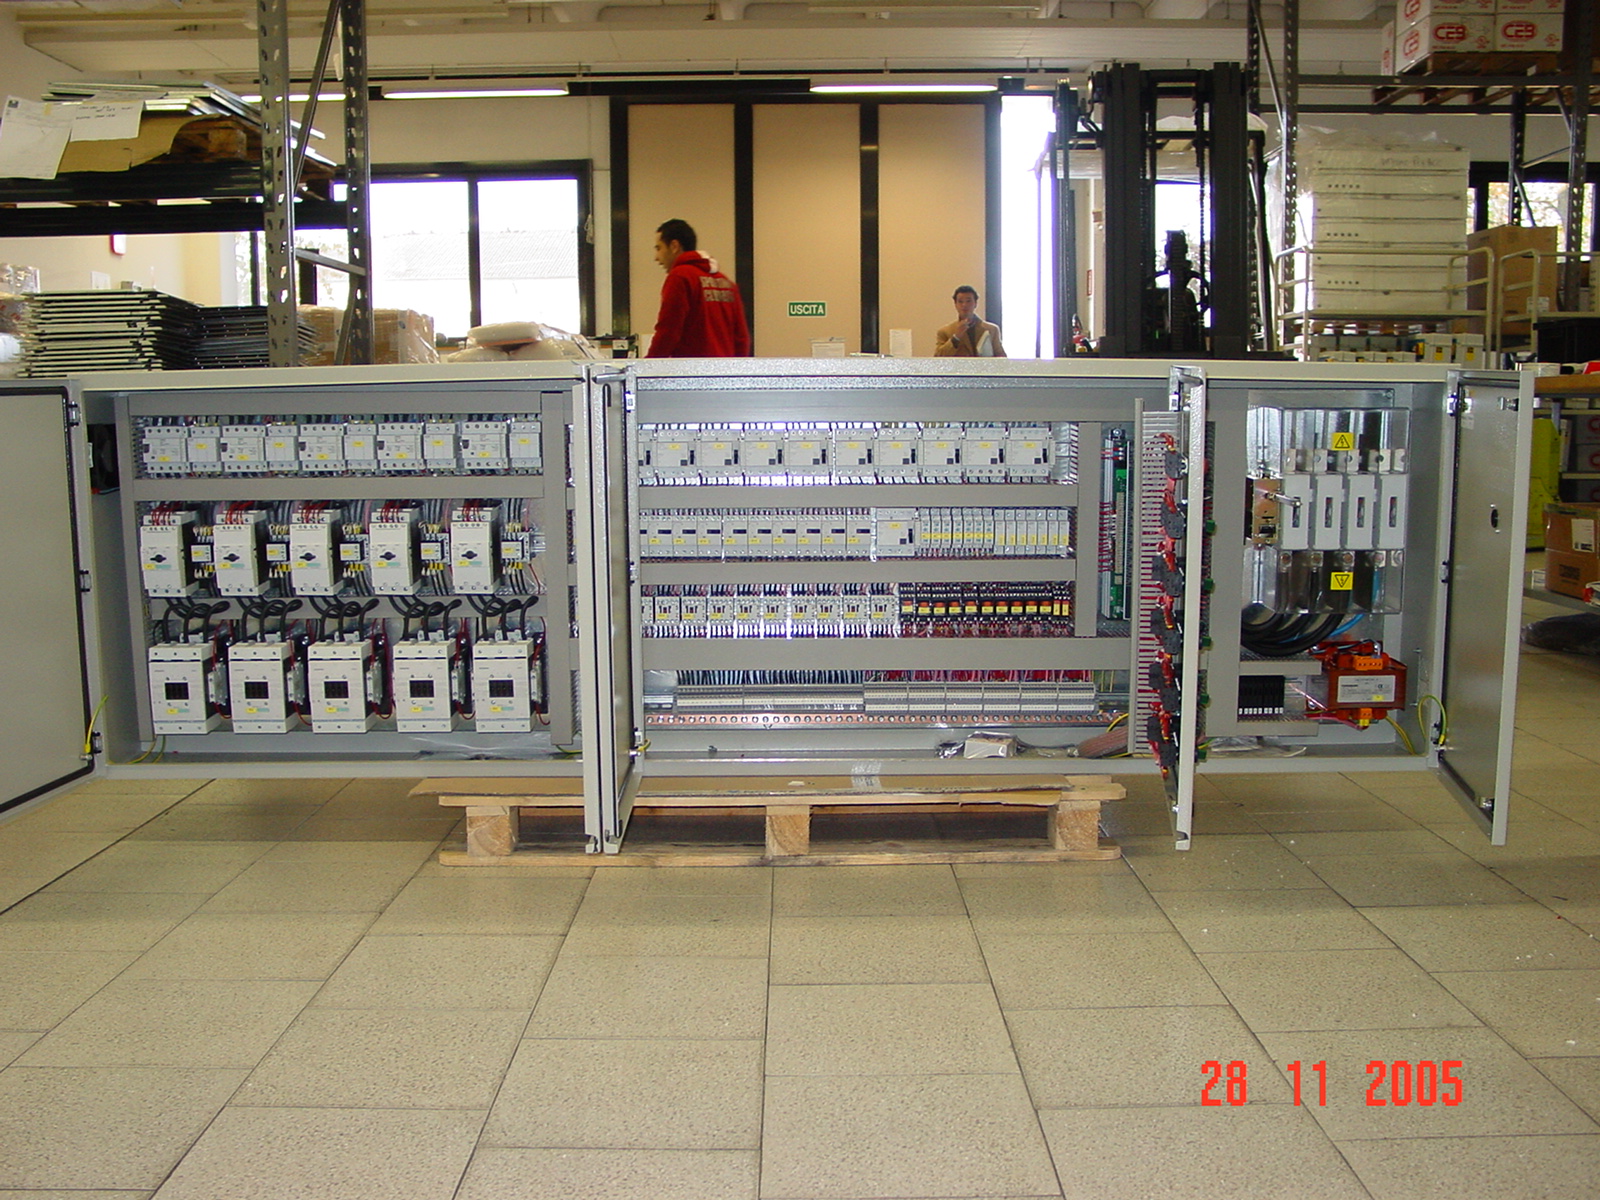 PEGO - Customized control panels for refrigeration plants.